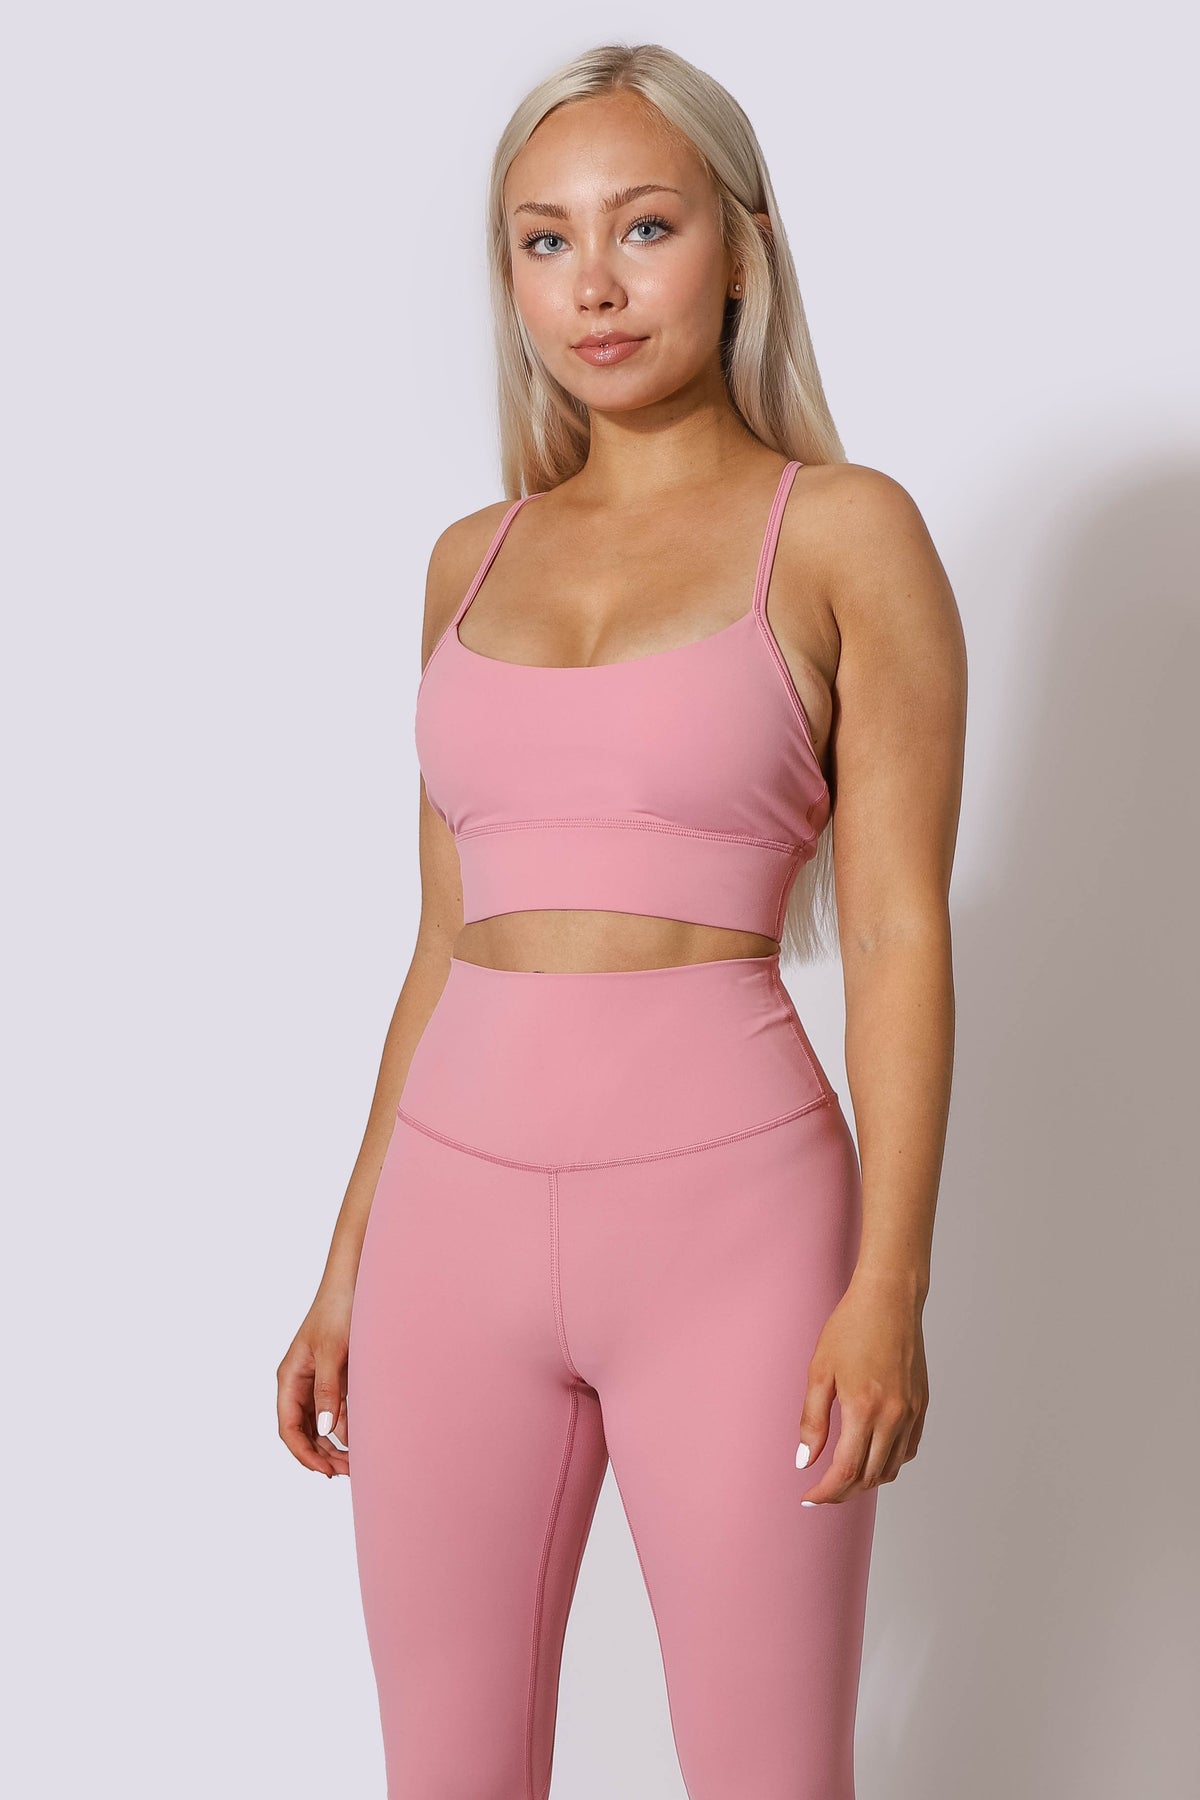 NEW Womtop060 - pink Sports Bra Jed North X Small 